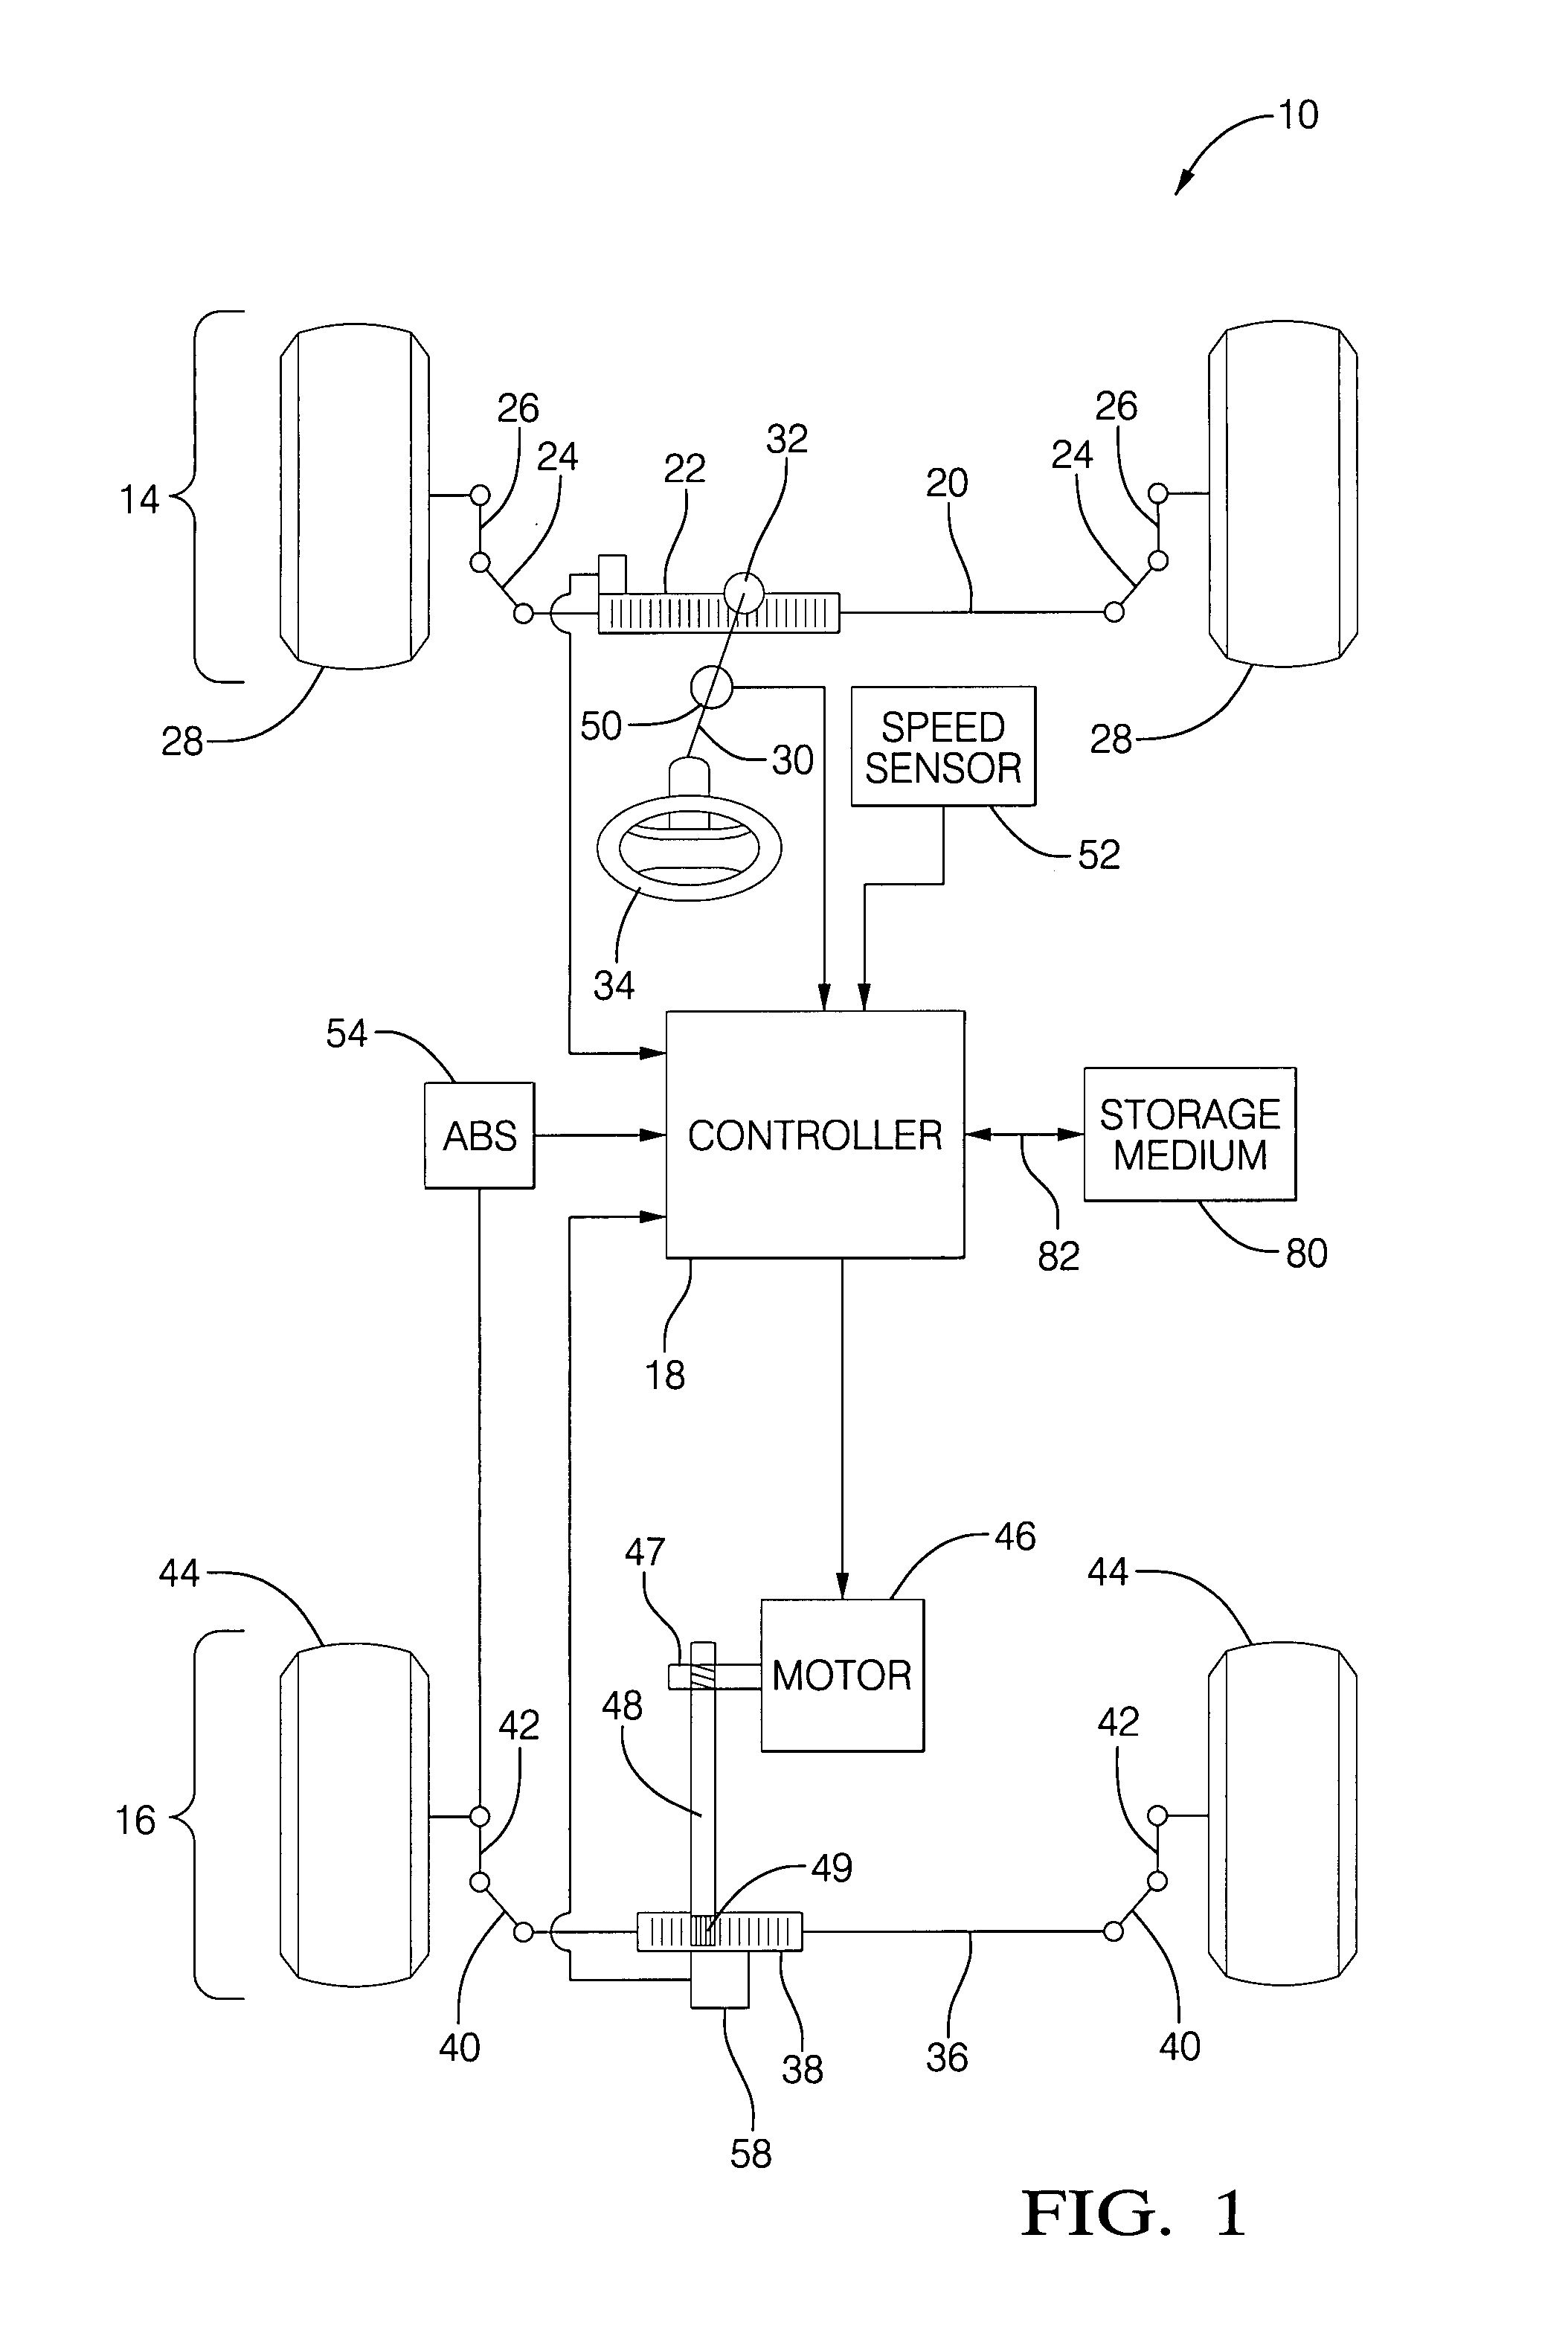 Method and apparatus for diagnosing motor damping network integrity